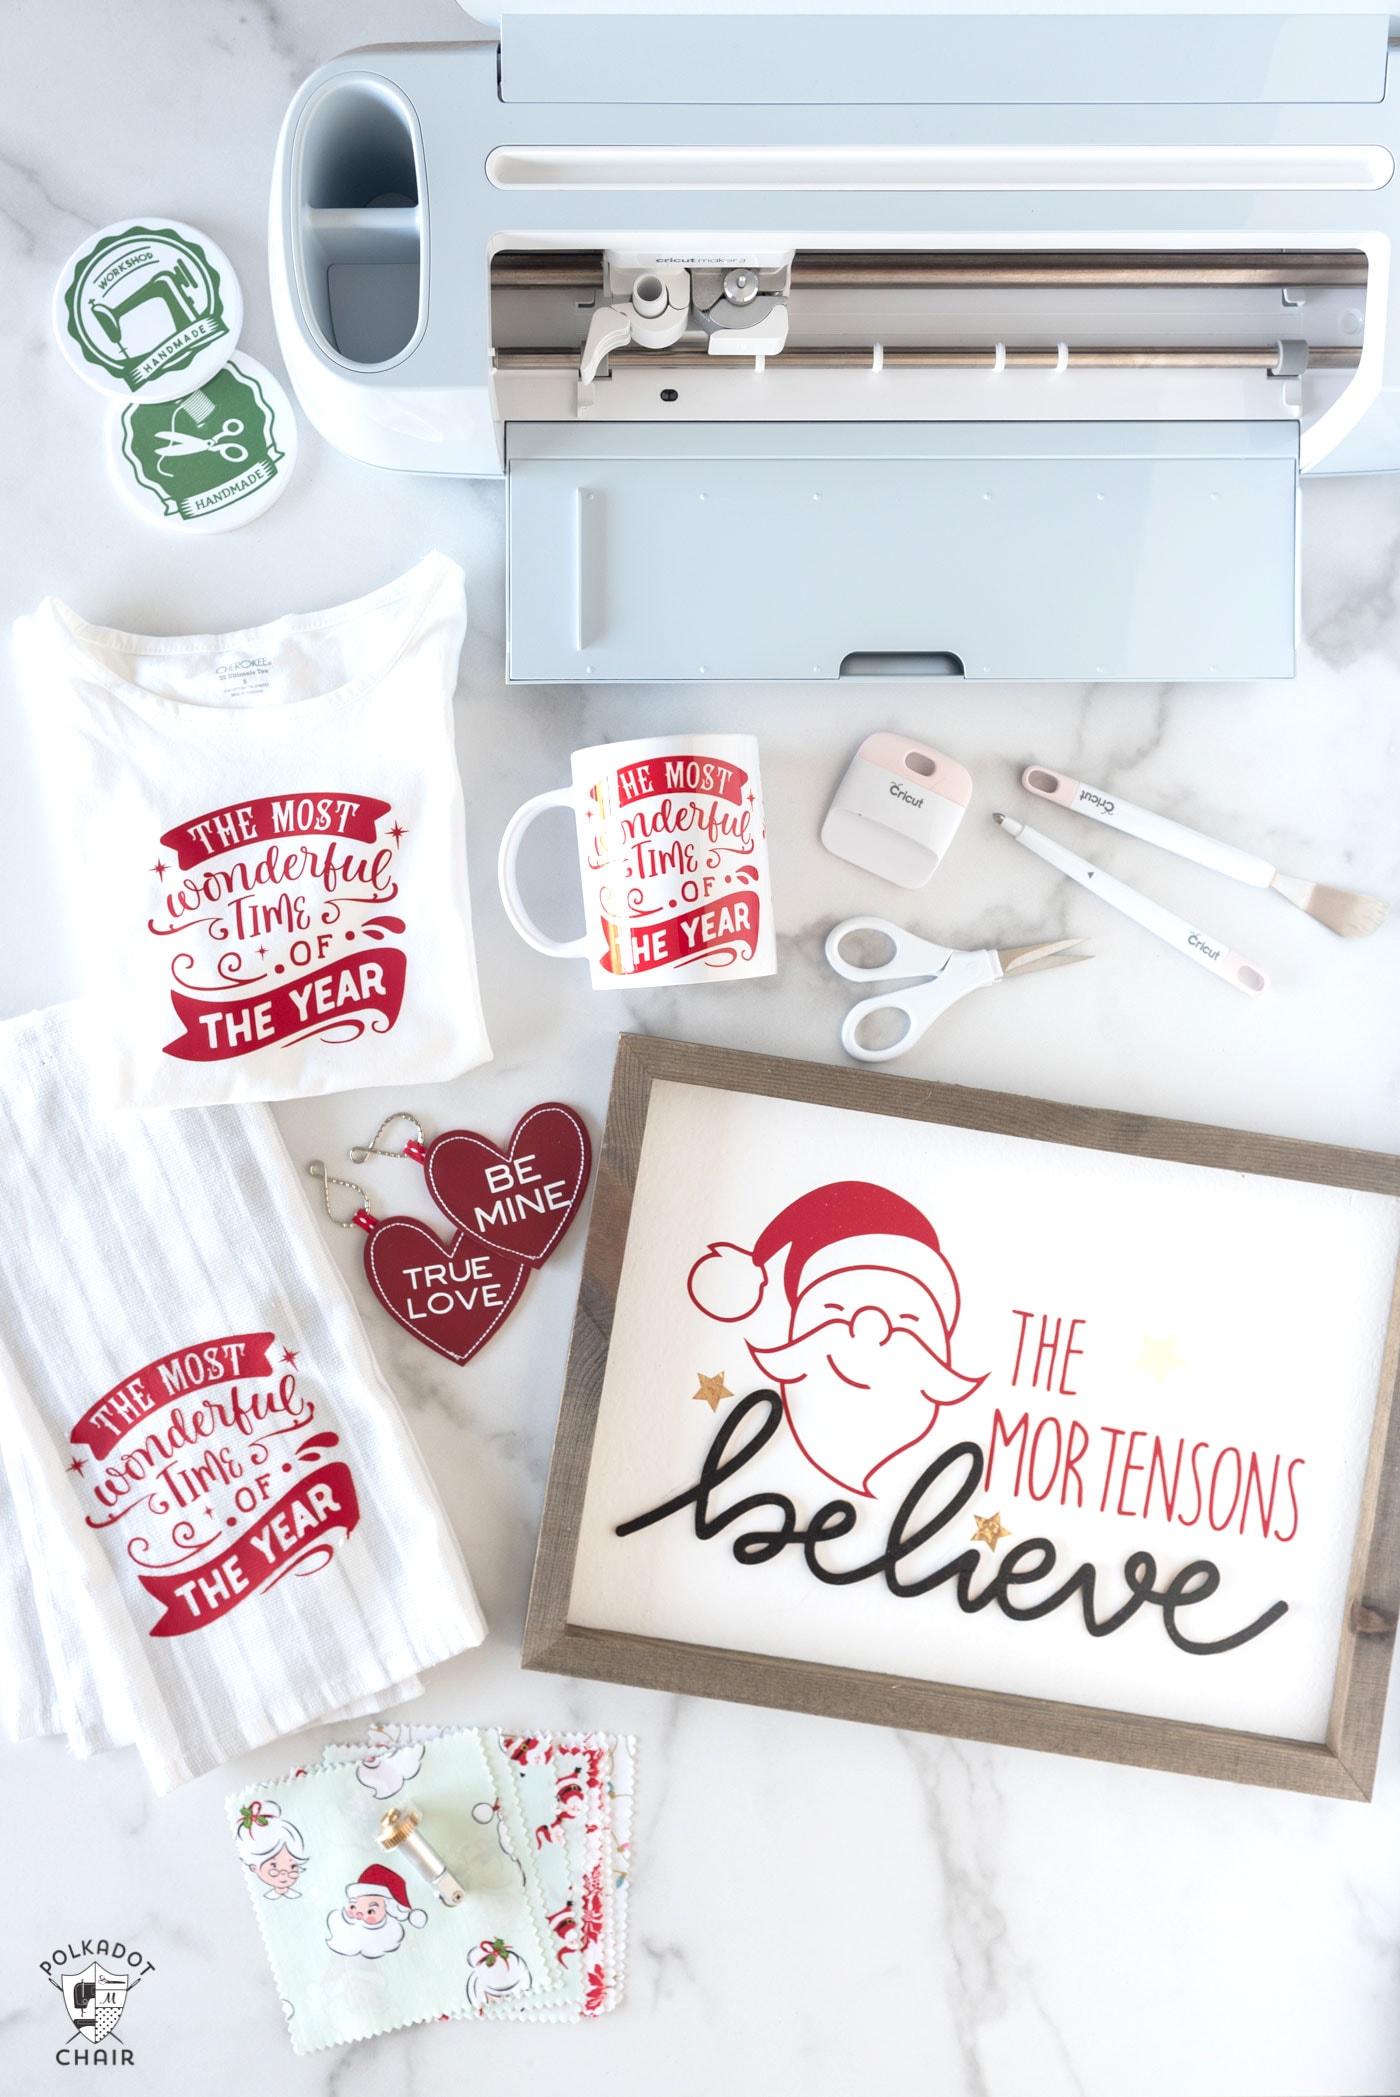 What does a Cricut Maker Machine Do, exactly!? A Beginner Review